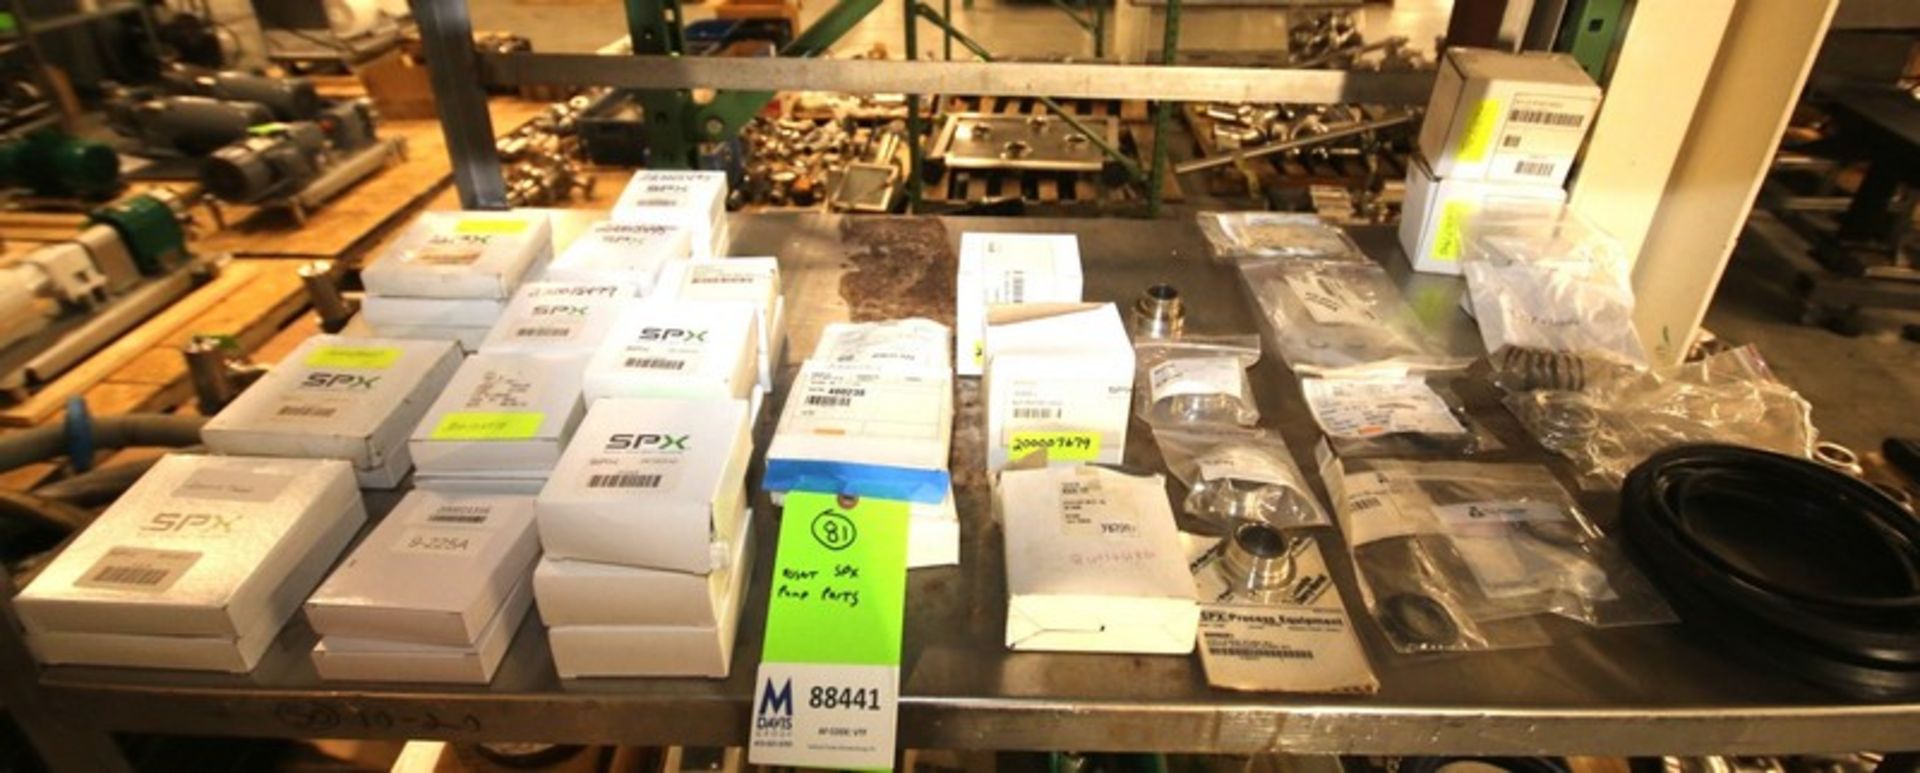 Assortment of SPX Pump Parts Including Repair Kits with Drive Collars, Seals, Gaskets, Retainer